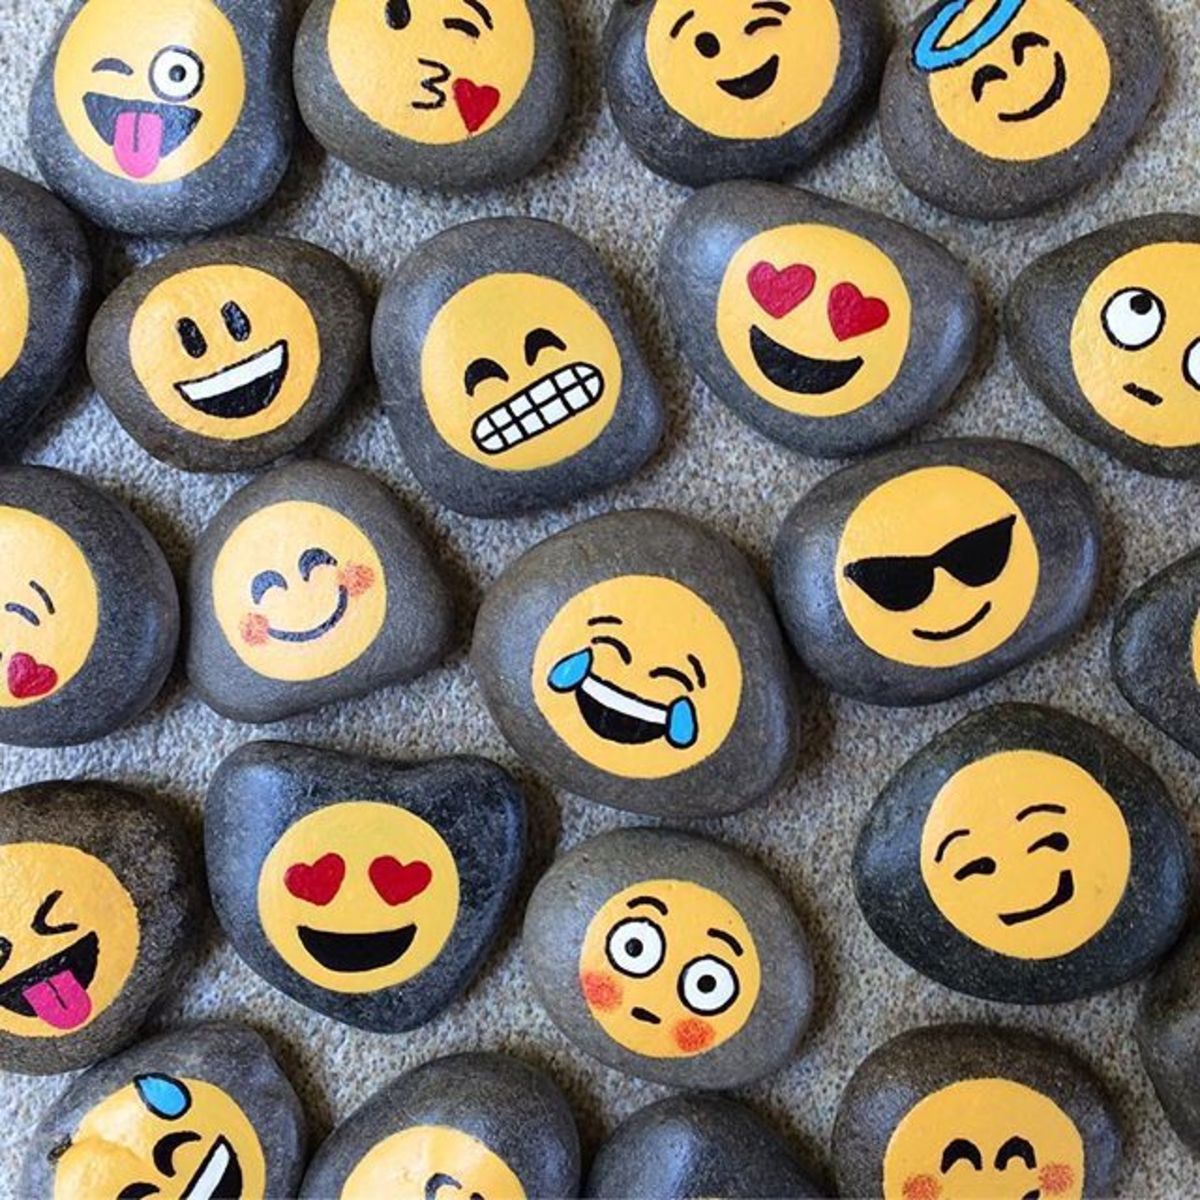 Painting emojis on rocks is just one of many awesome rock painting ideas to try!